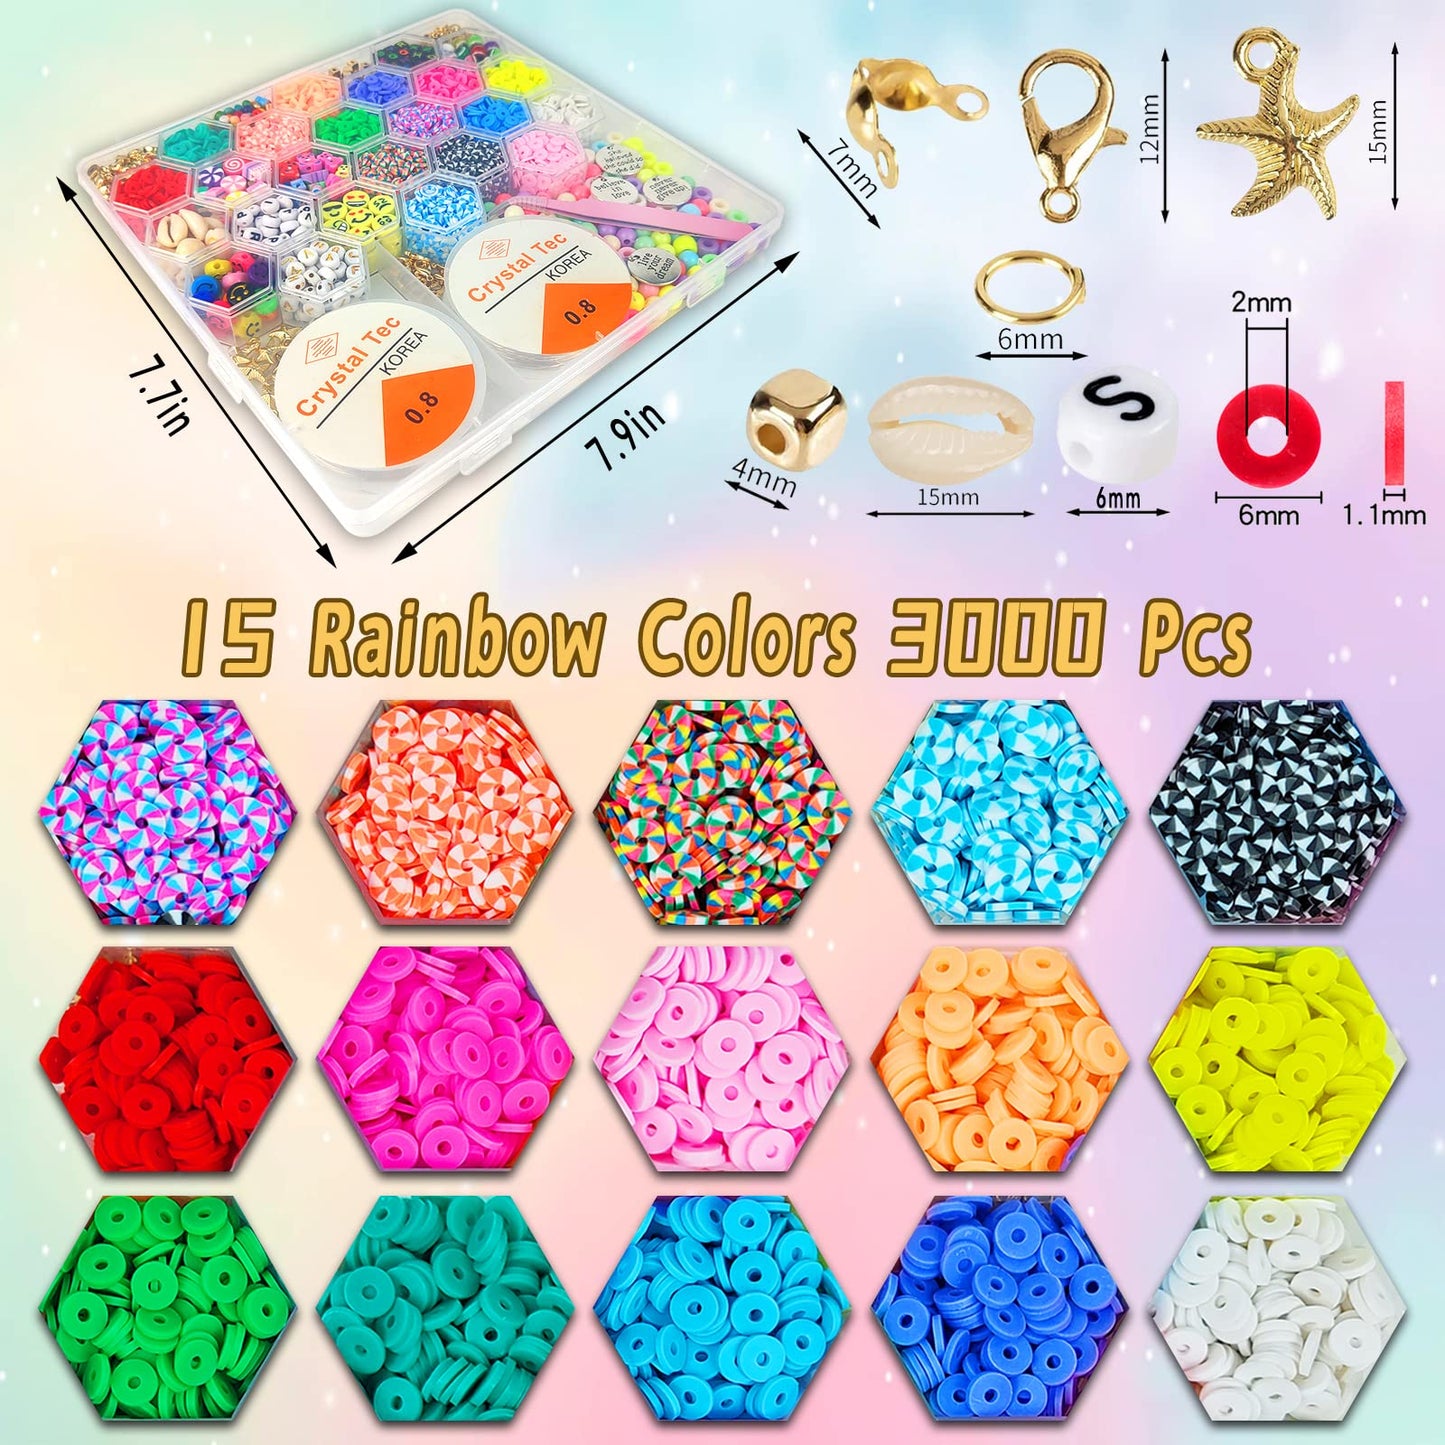 Flat Clay Beads for Jewelry Bracelet Making Kit,6mm Flat Polymer Heishi Beads DIY Arts and Crafts Kit with Smiley Face Letter Bead,Gifts Toys for Girls Age 6-12